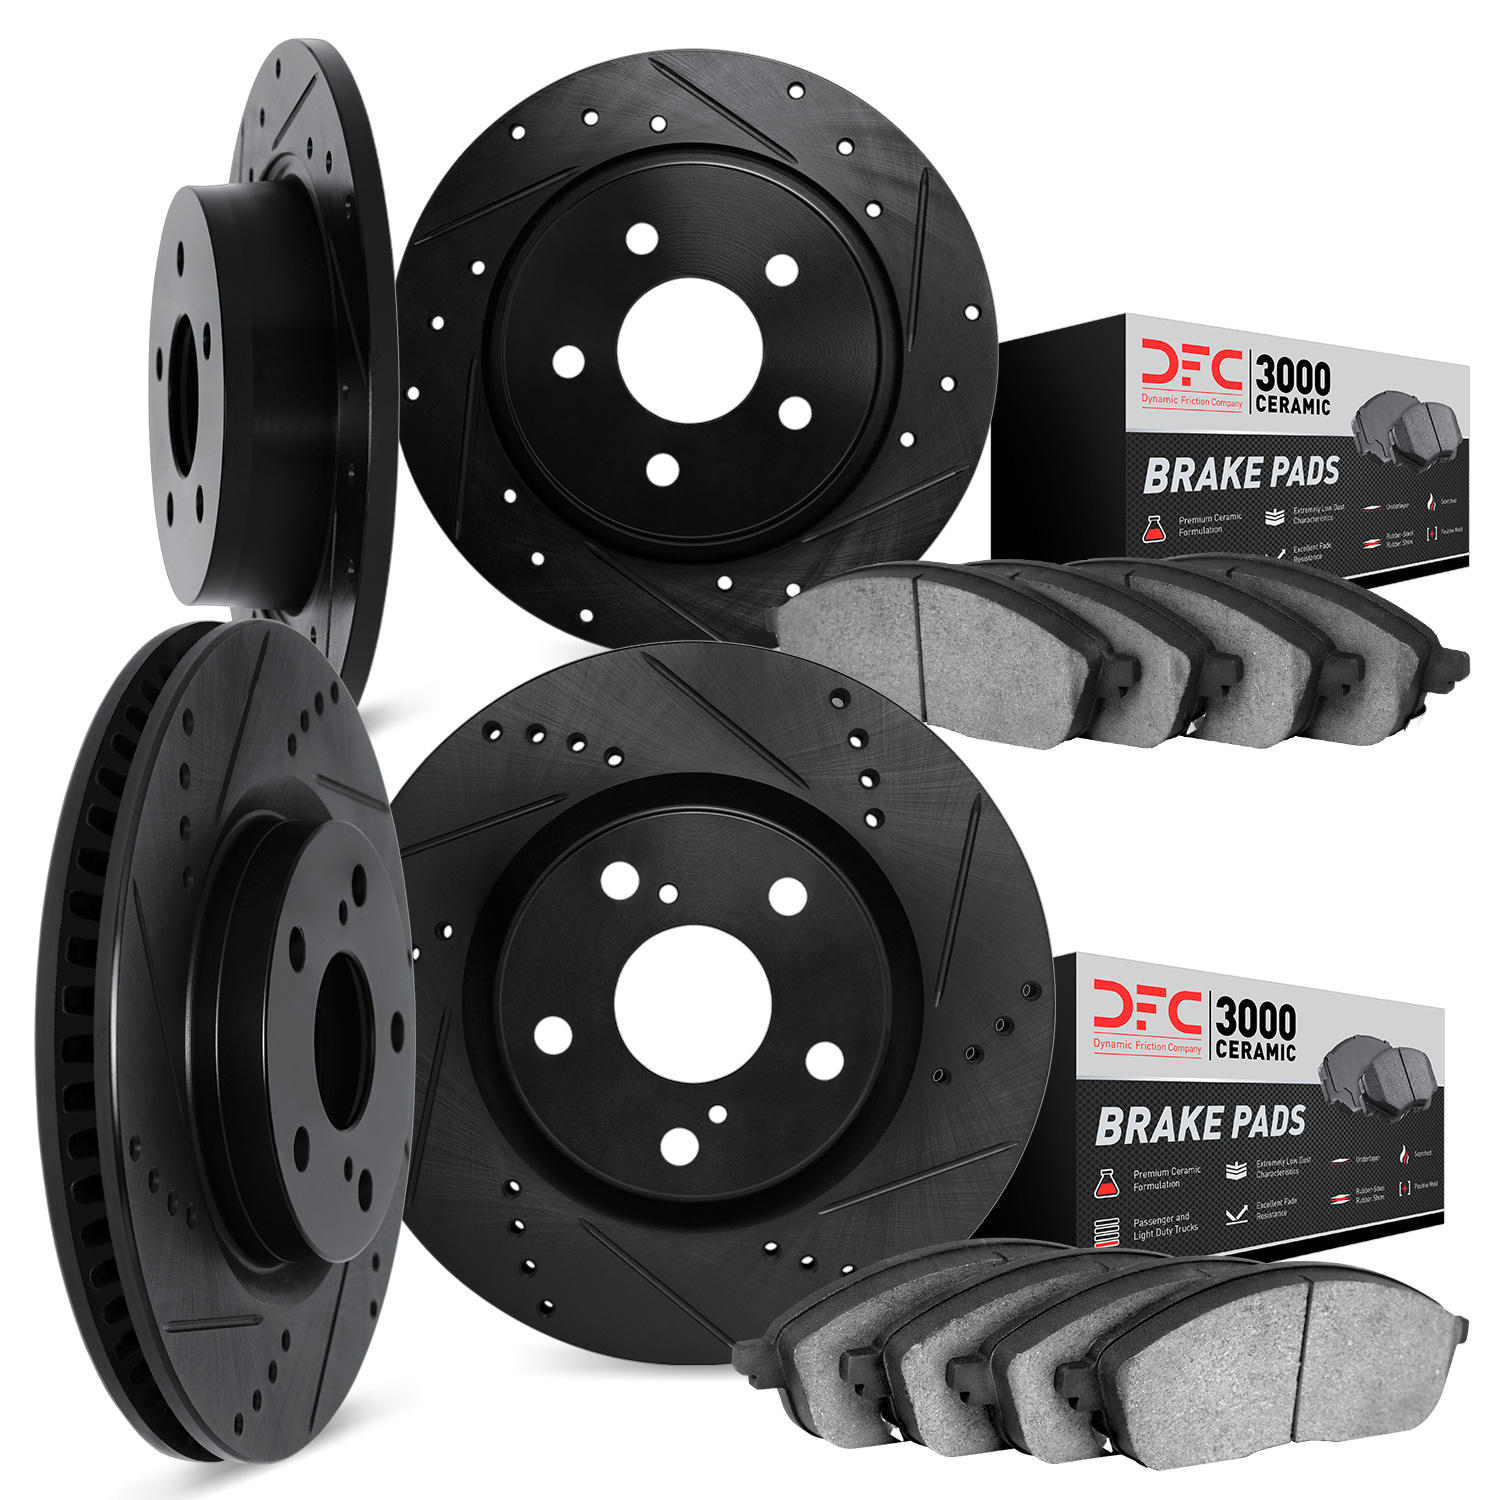 8304-39004 Drilled/Slotted Brake Rotors with 3000-Series Ceramic Brake Pads Kit [Black], 1995-2000 Mopar, Position: Front and Re